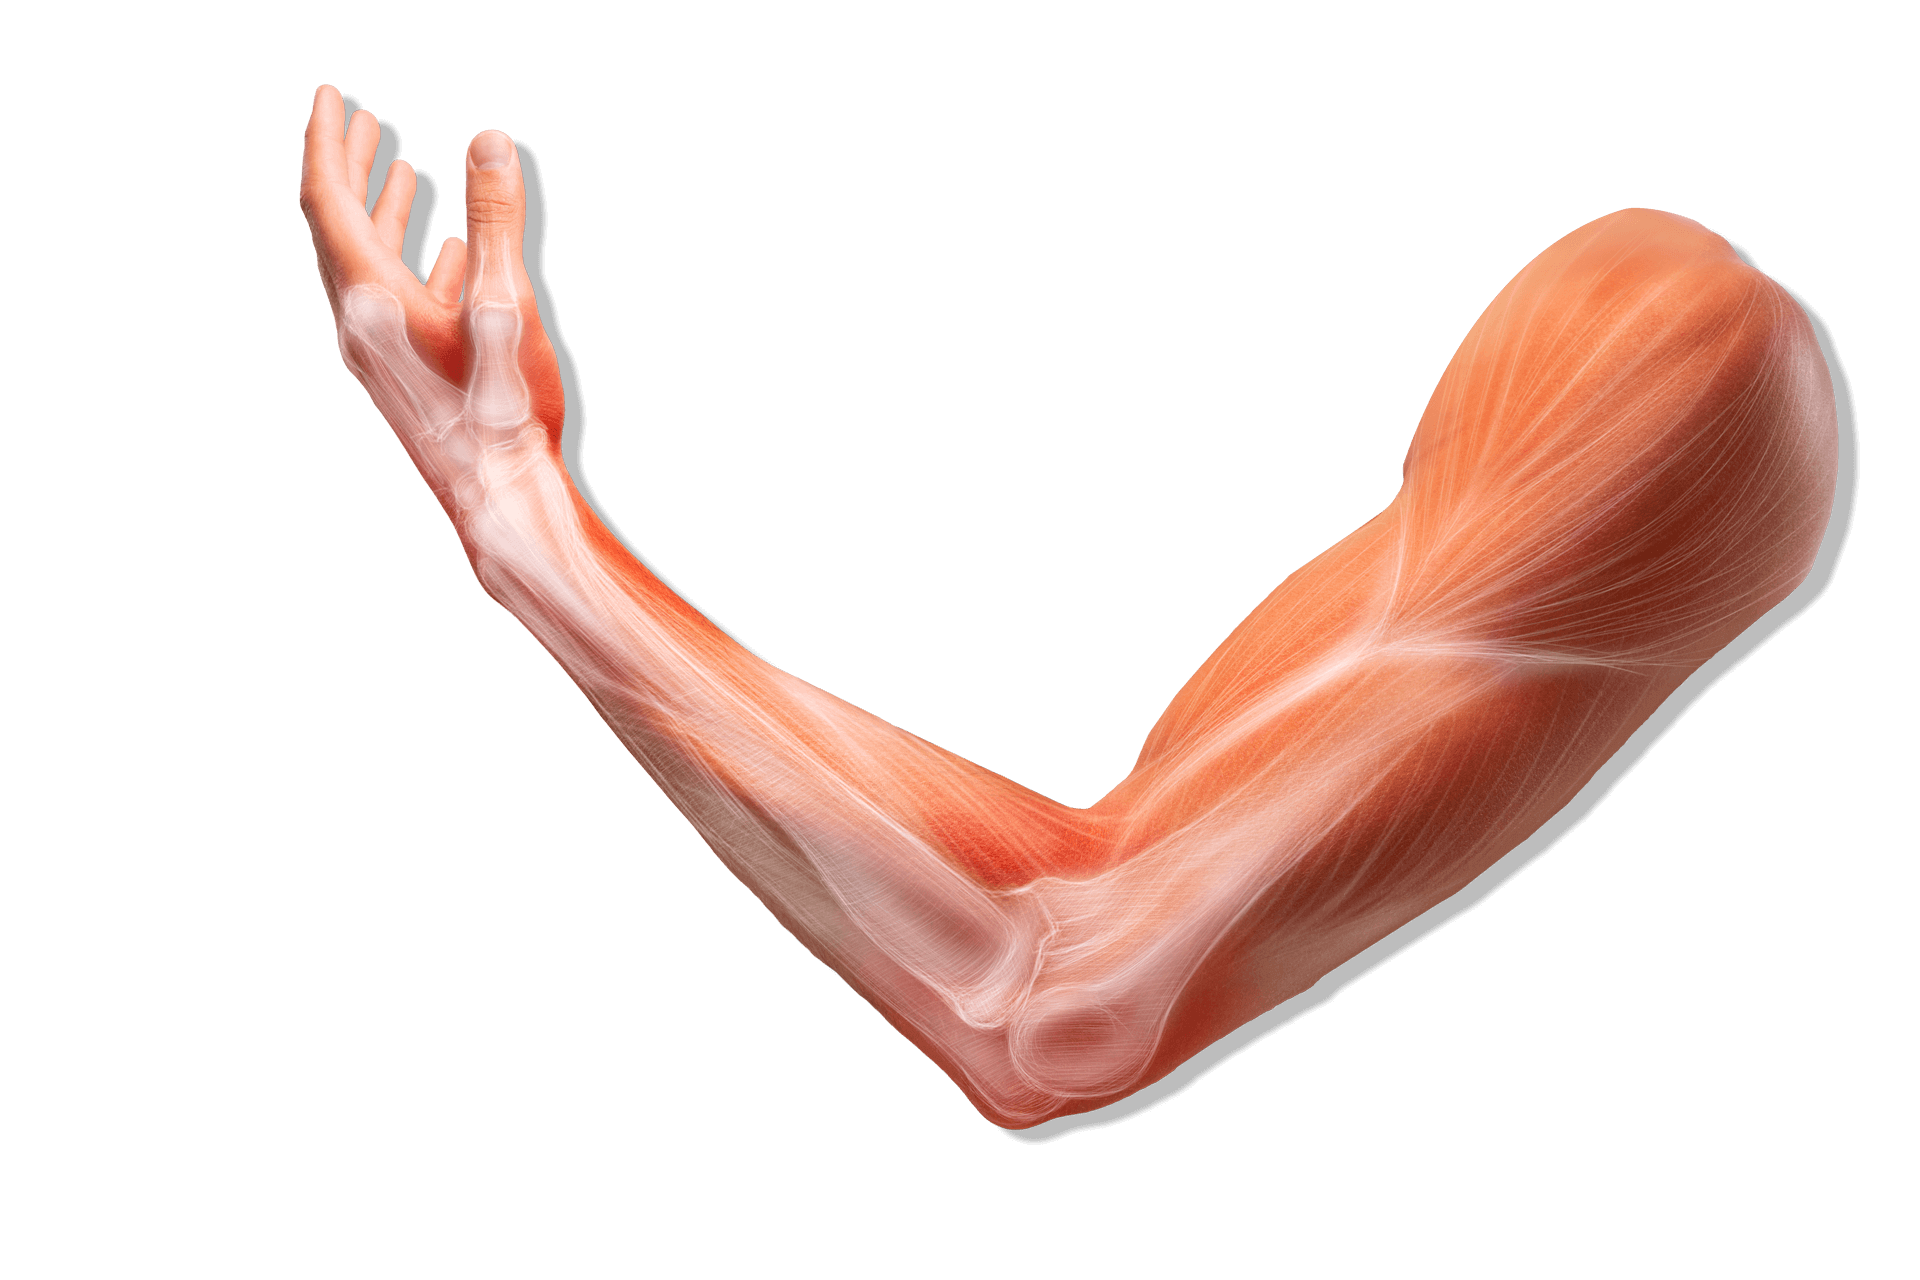 Shoulder, elbow, wrist, hand physiotherapy | action rehab - shoulder, elbow, wrist and hand physiotherapists